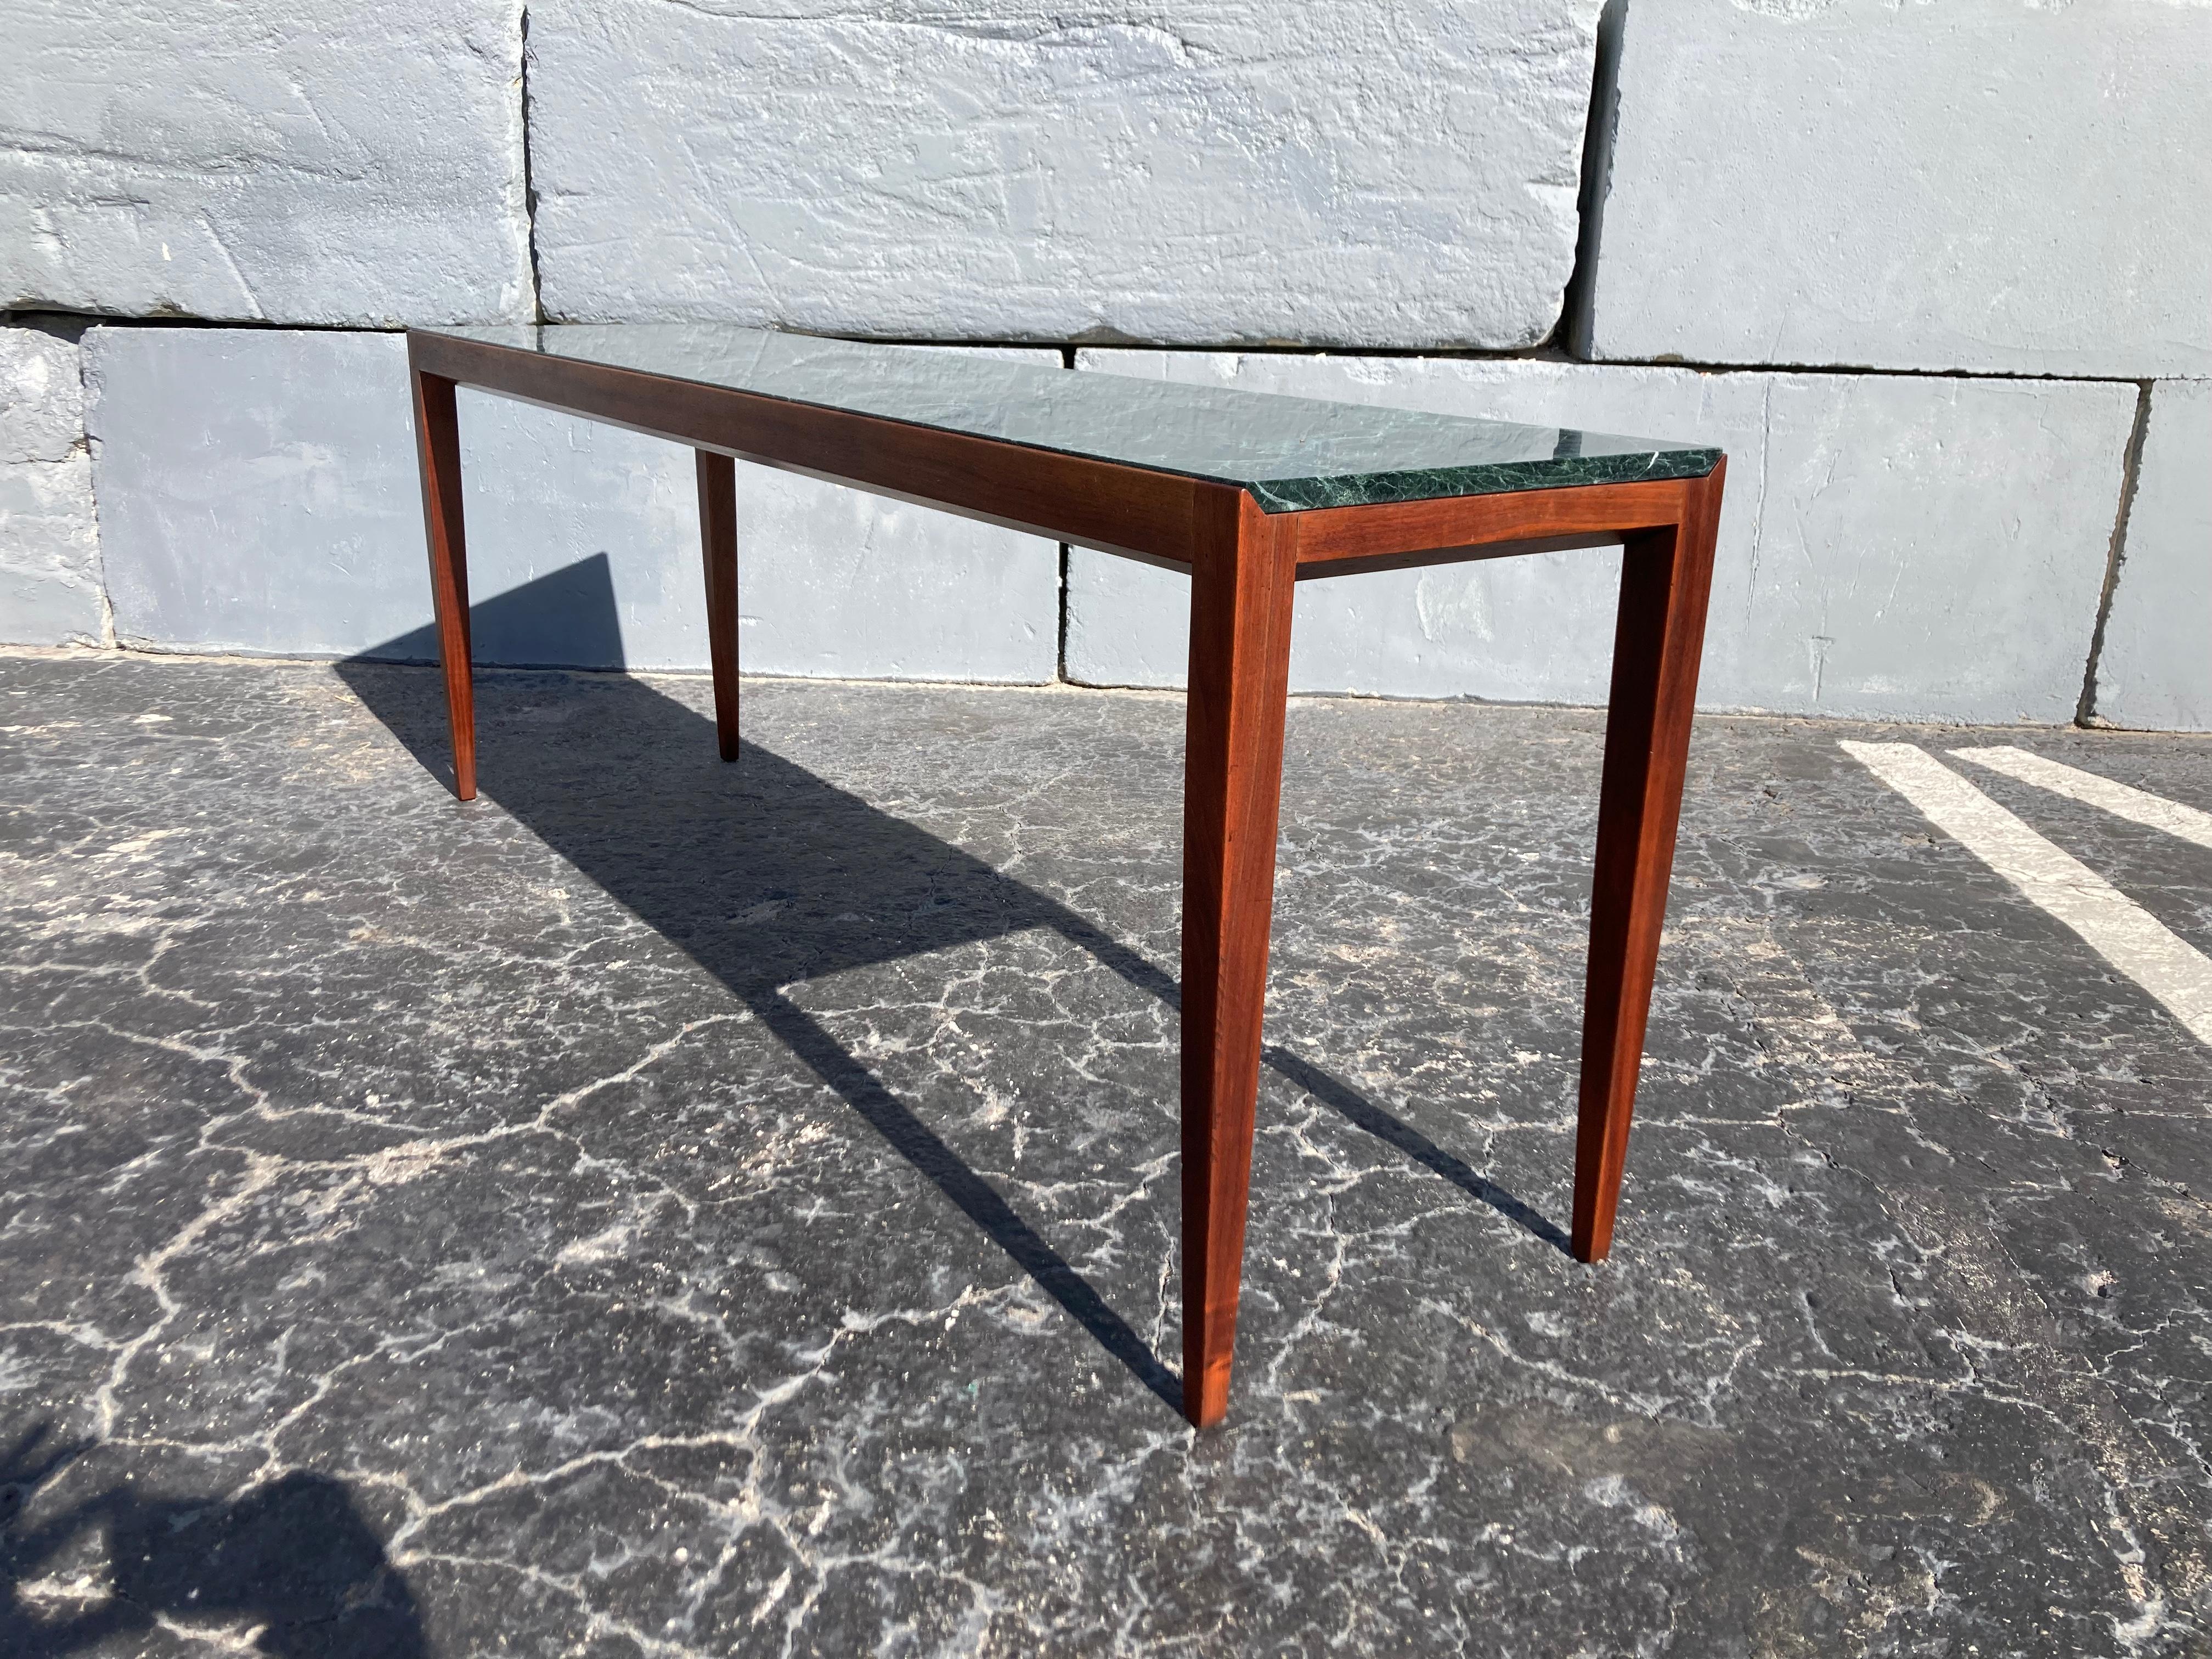 Stunning Console Table. Solid walnut base with marble top. Excellent craftsmanship.